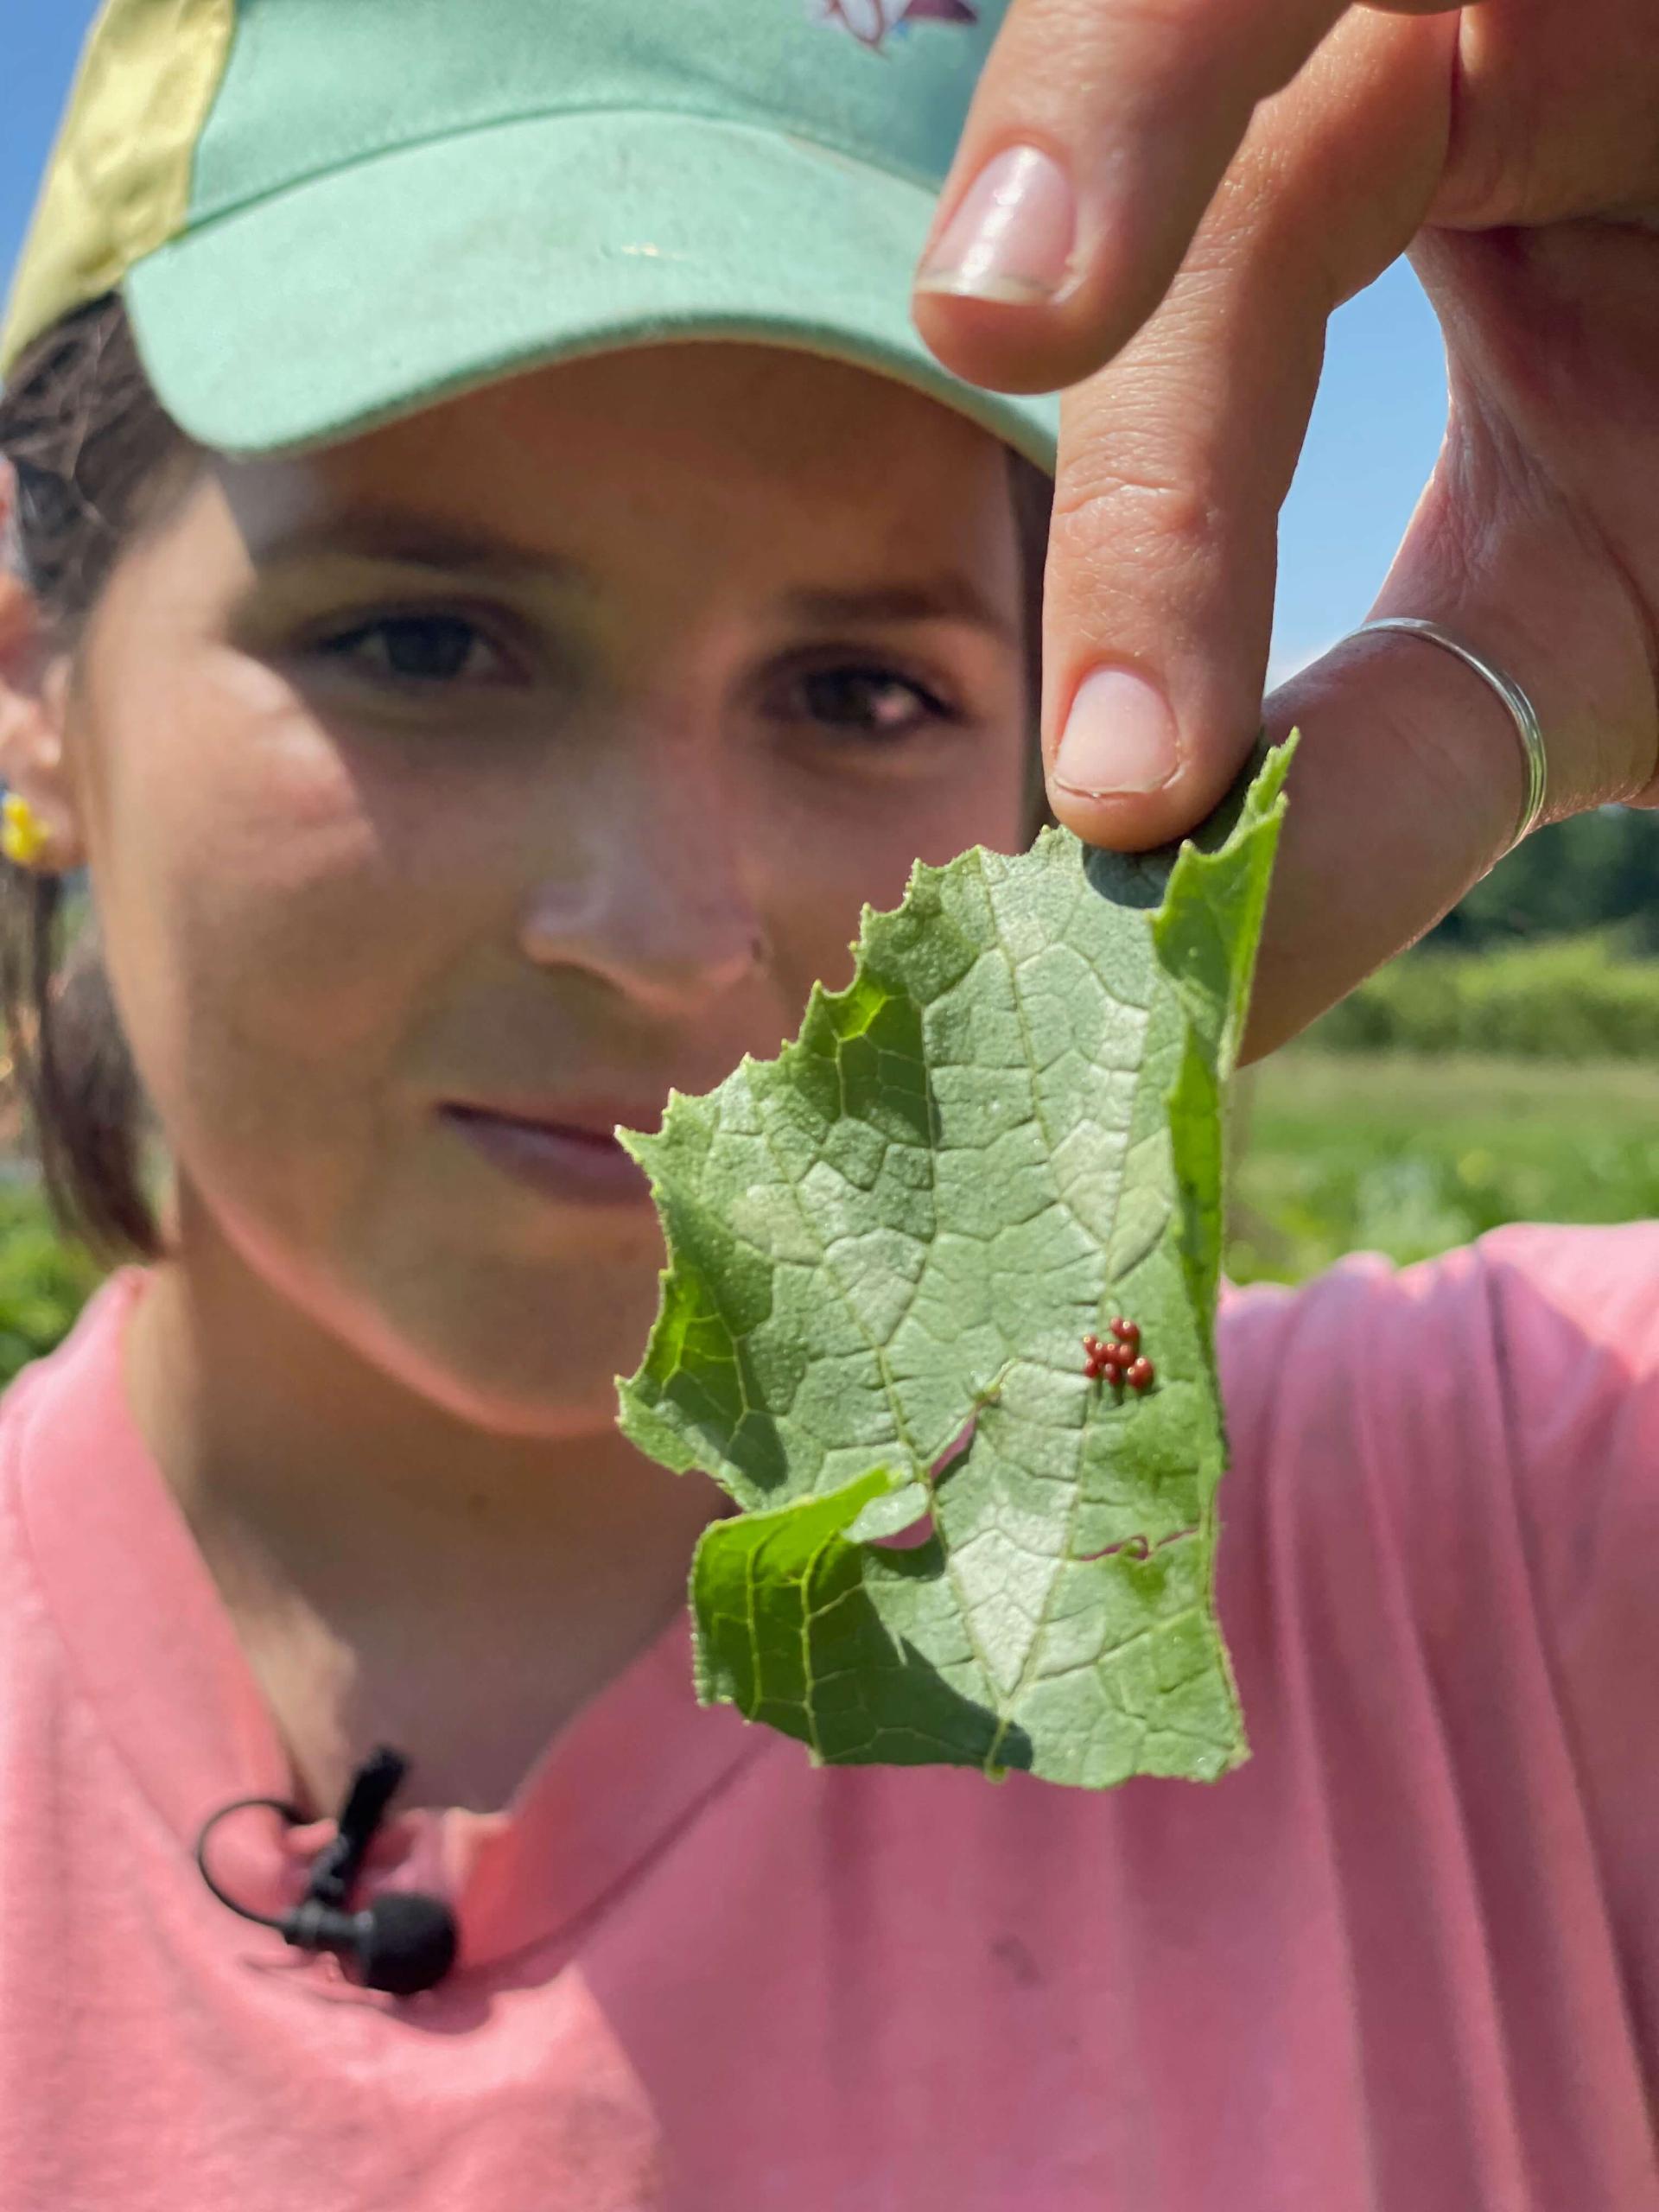 Student examines a plant pest on a leaf